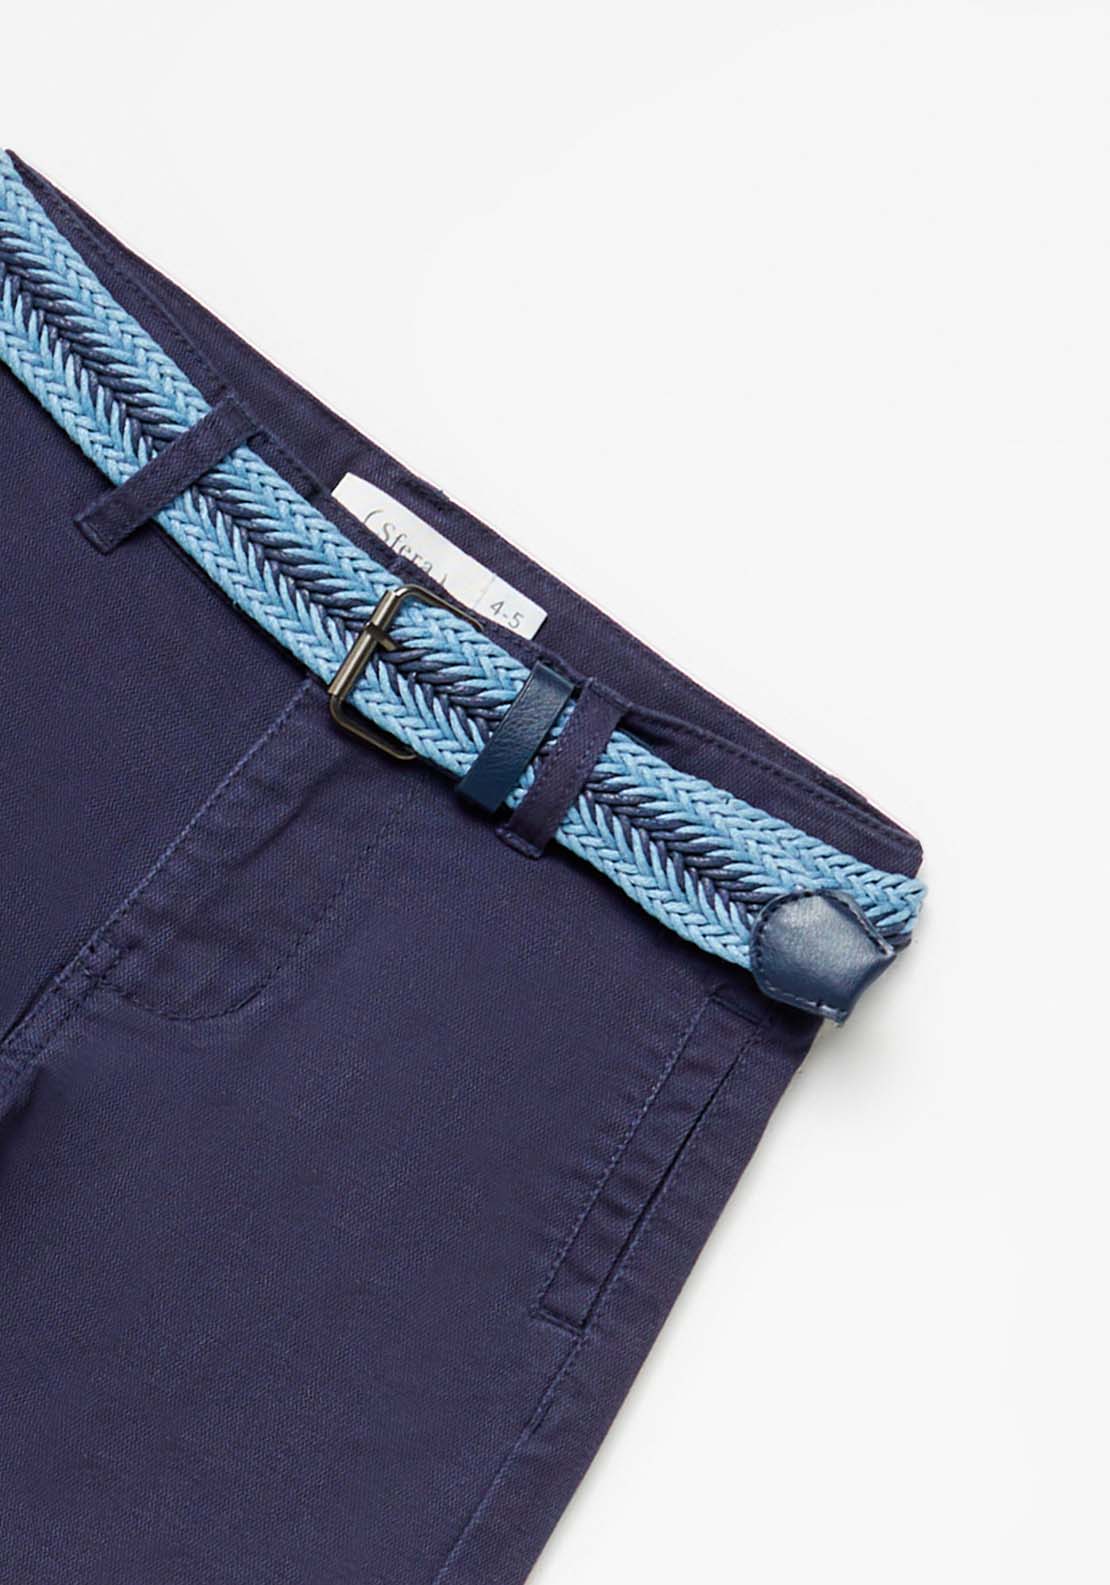 Sfera Formal Shorts With Belt - Navy / Blue 3 Shaws Department Stores